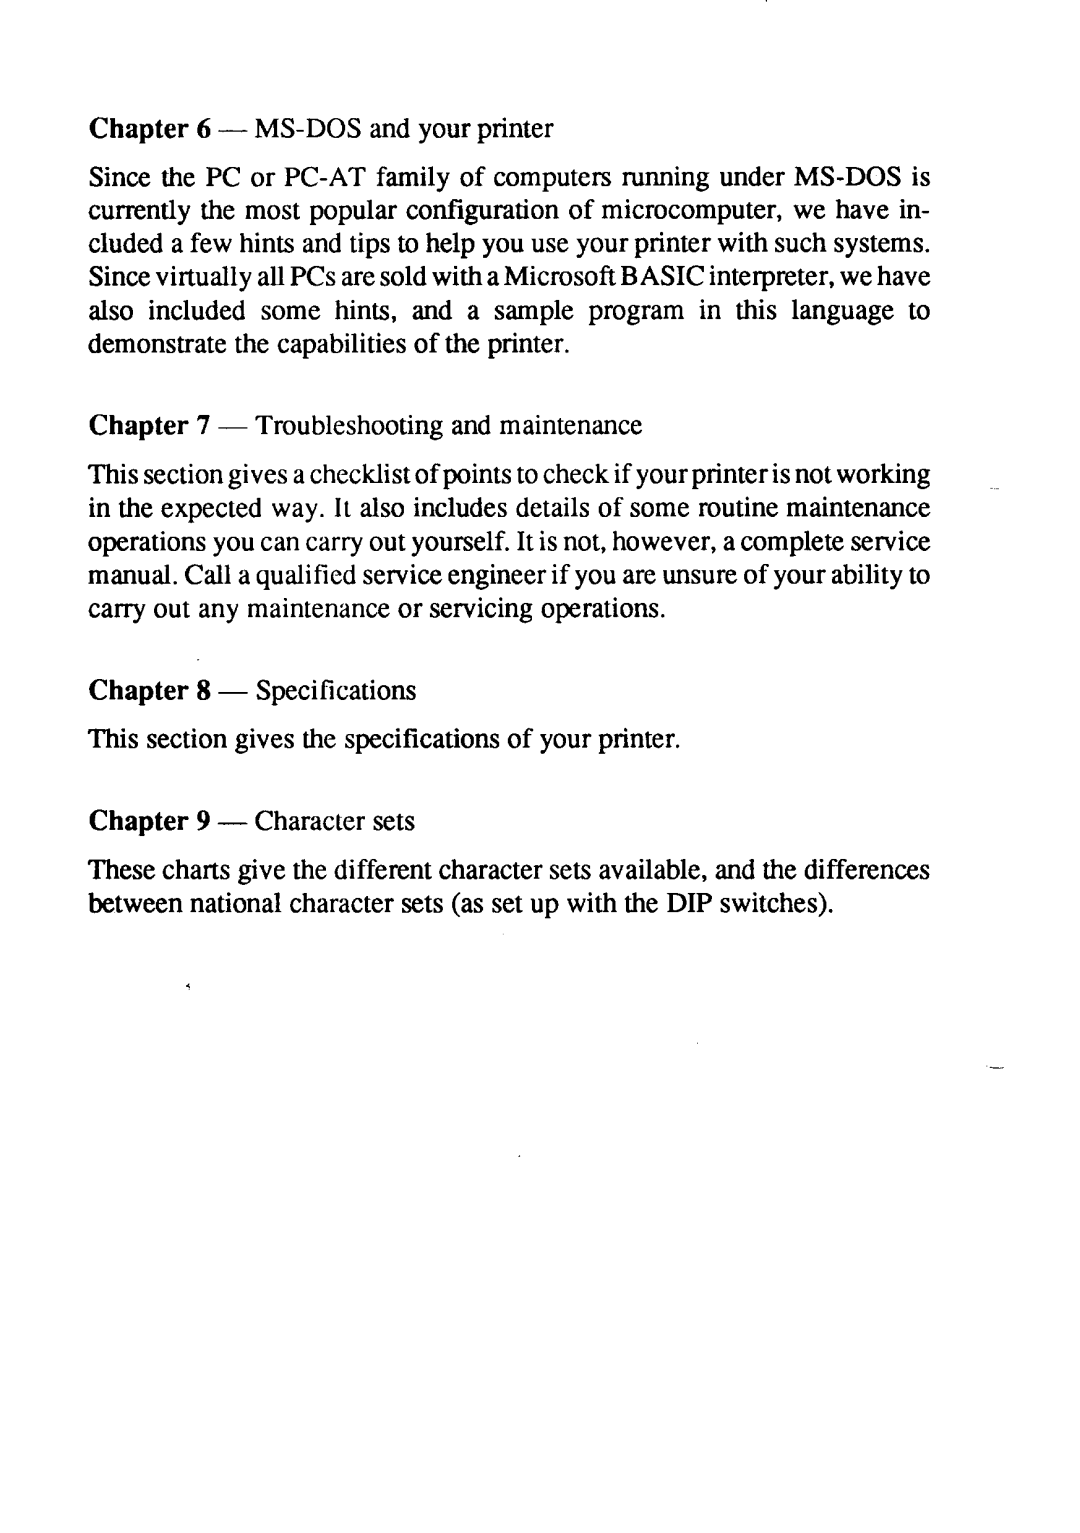 Star Micronics LC24-15 user manual MS-DOS and your printer, Troubleshooting and maintenance, Specifications, Character sets 